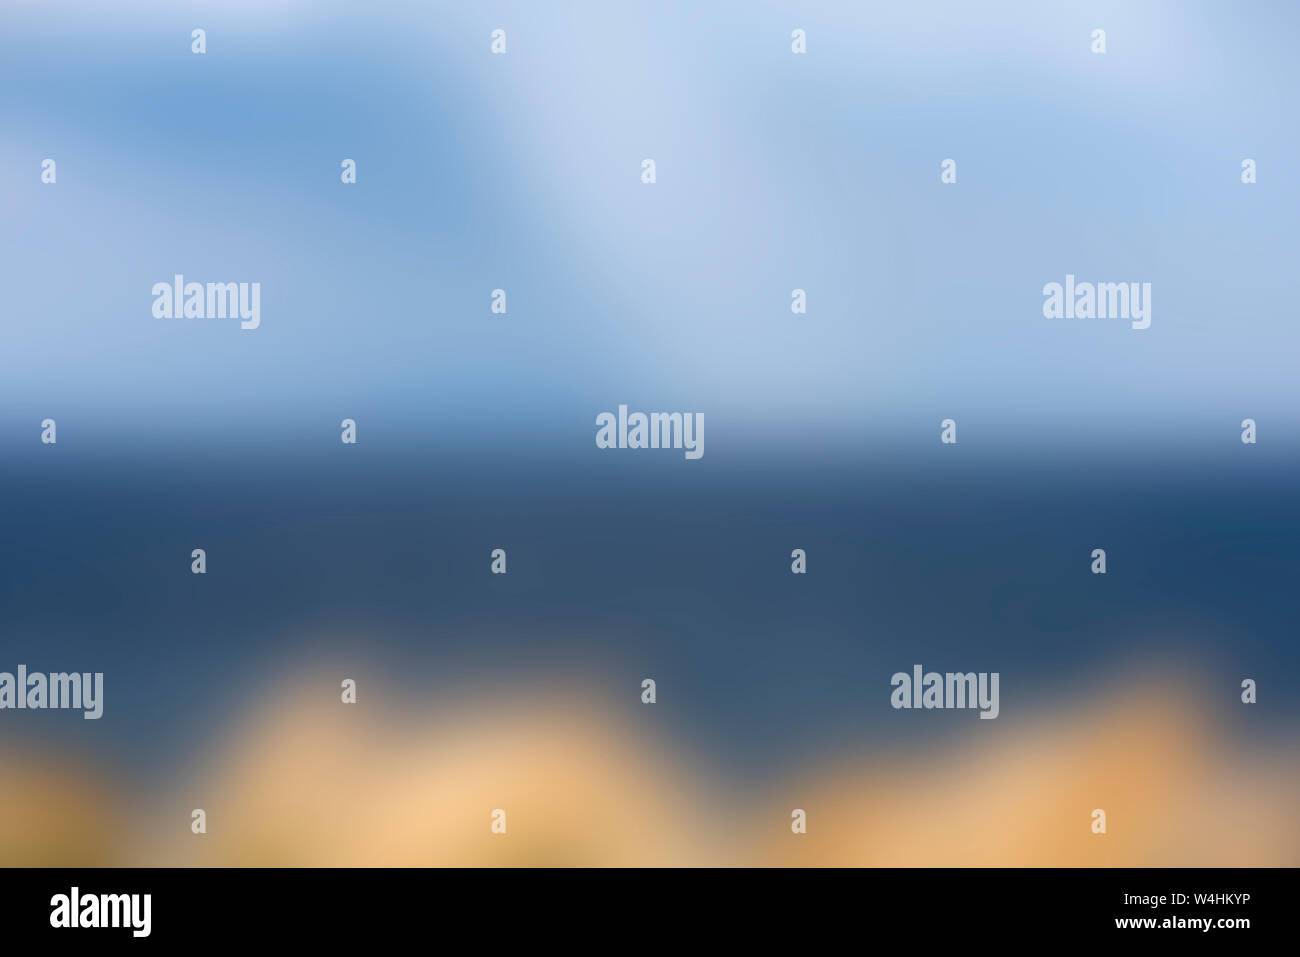 abstract sea background. photography Stock Photo